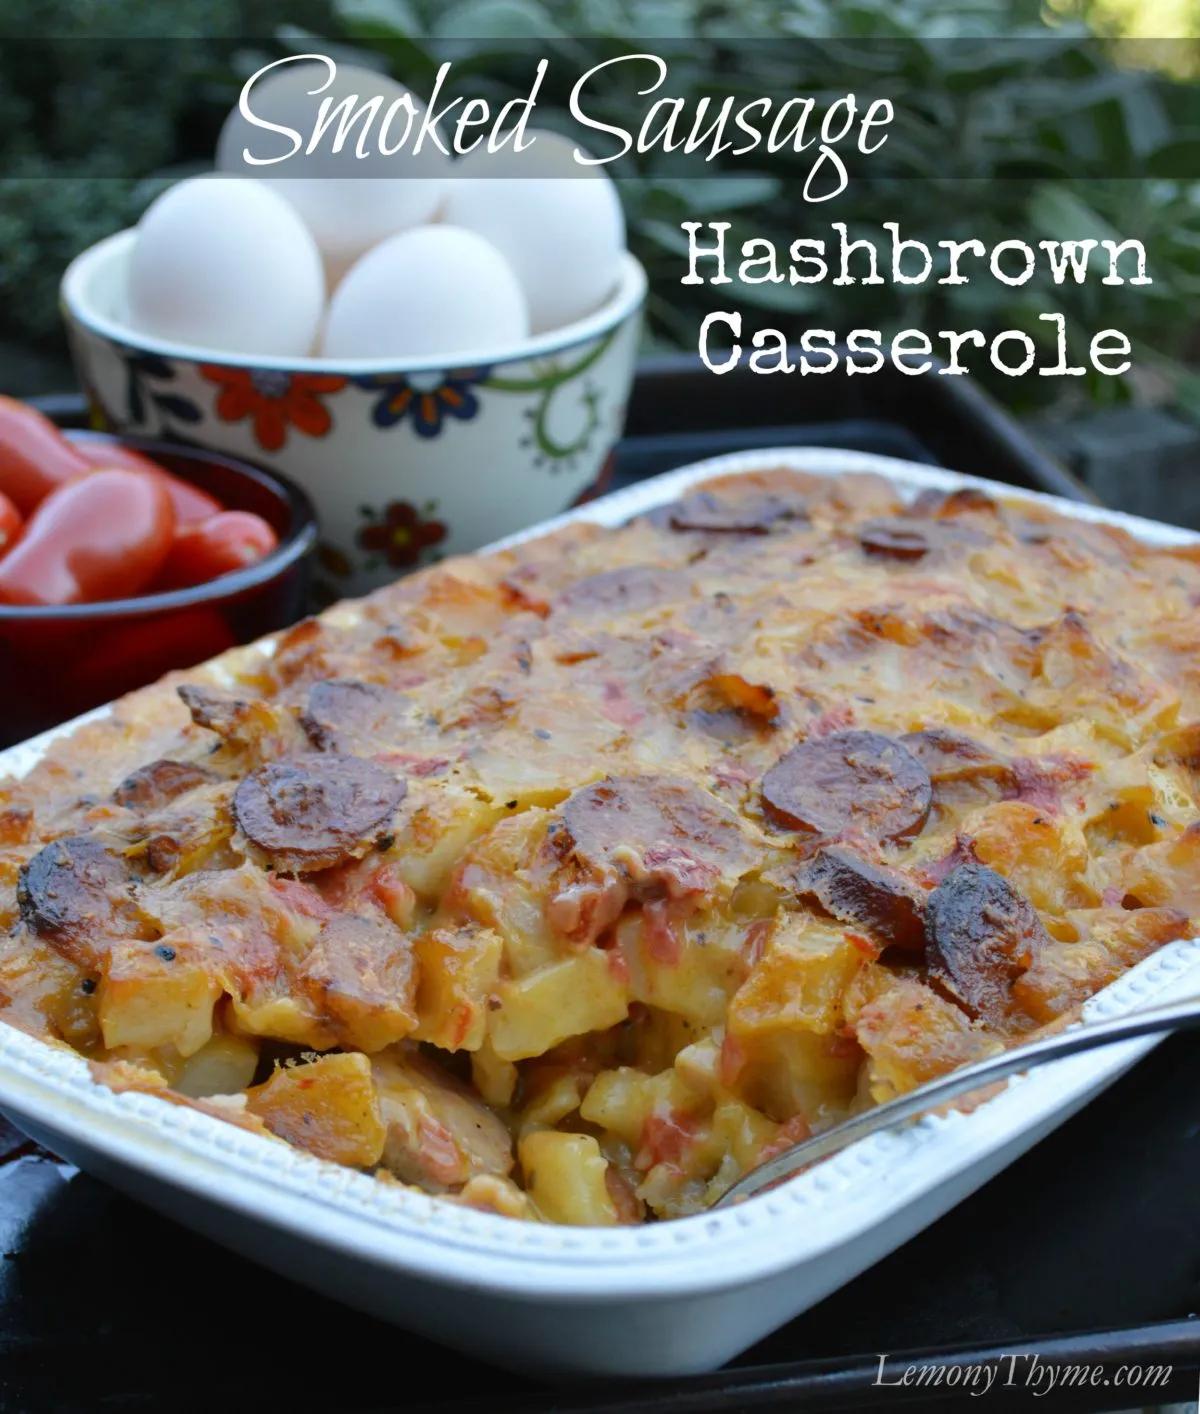 smoked sausage hash brown casserole - Why is my hash brown casserole mushy